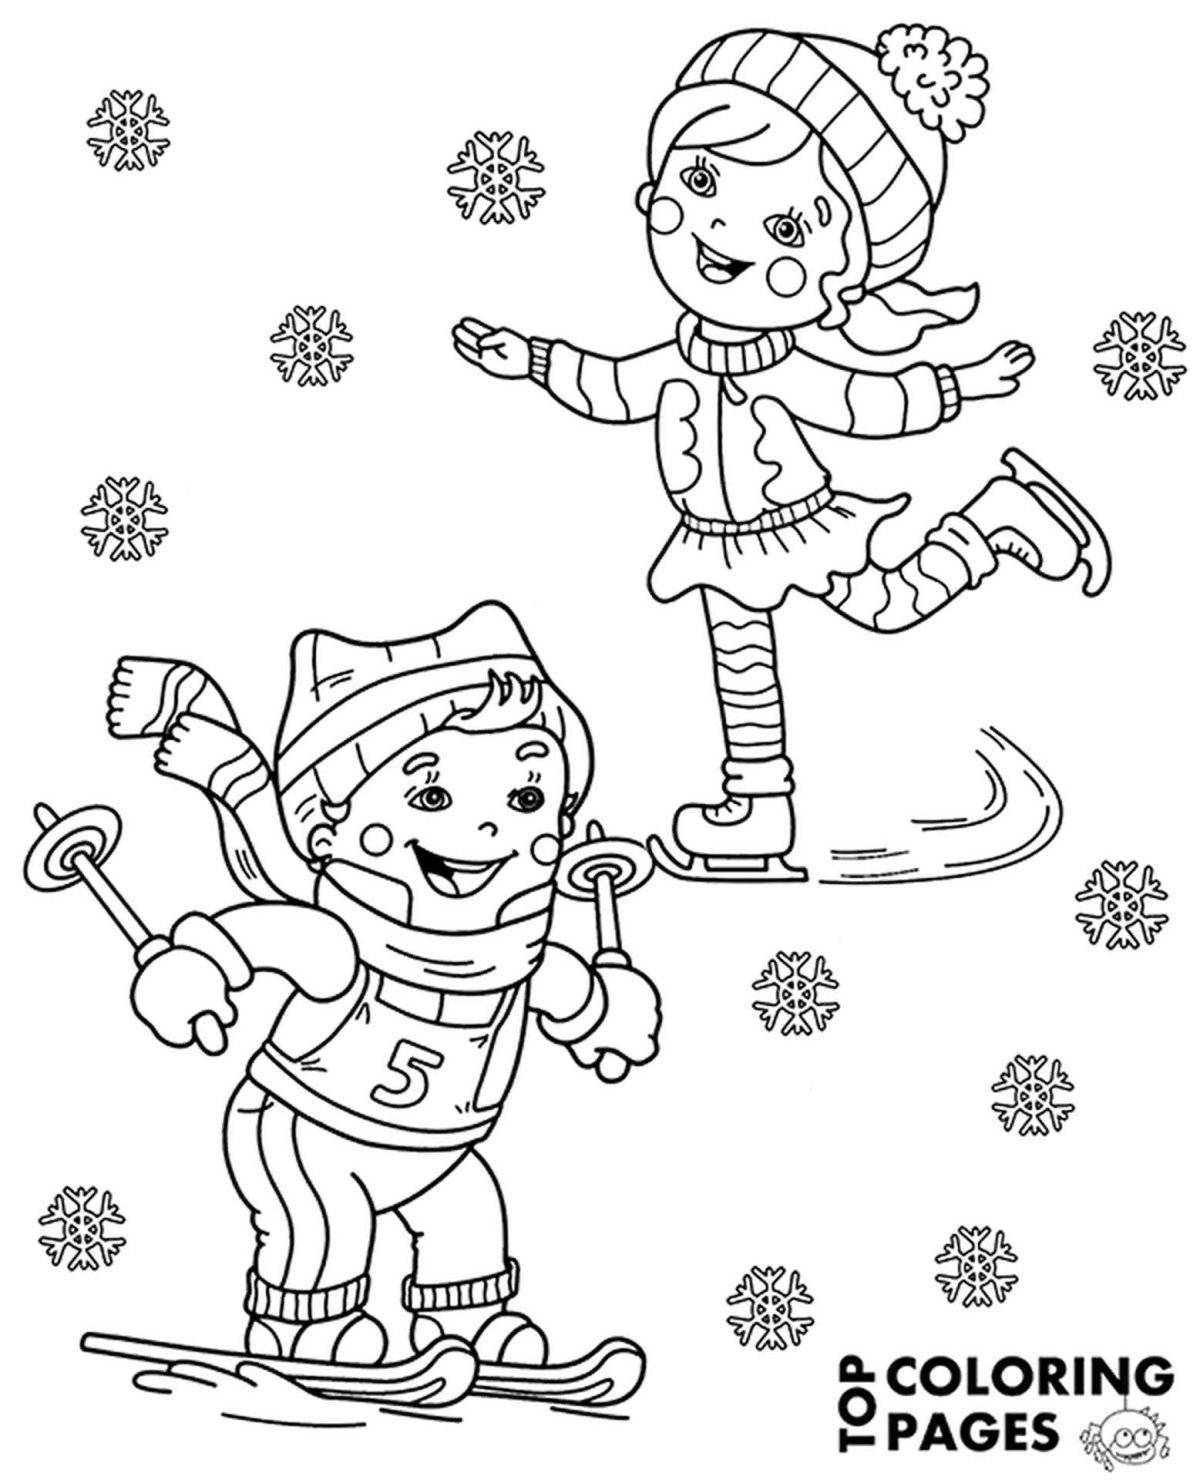 Inspirational sports coloring pages for preschoolers